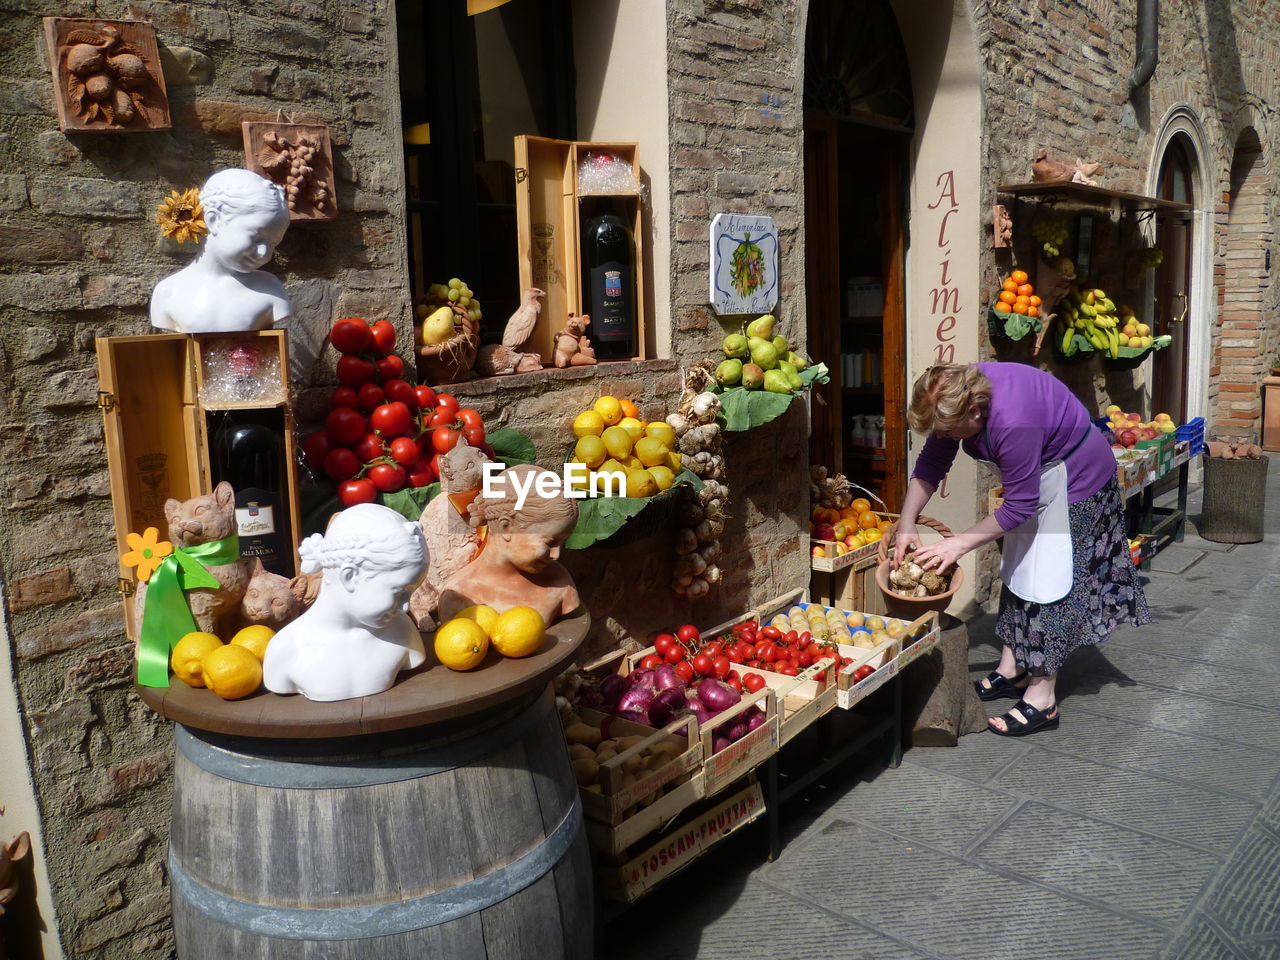 Woman sorting vegetables in front of store